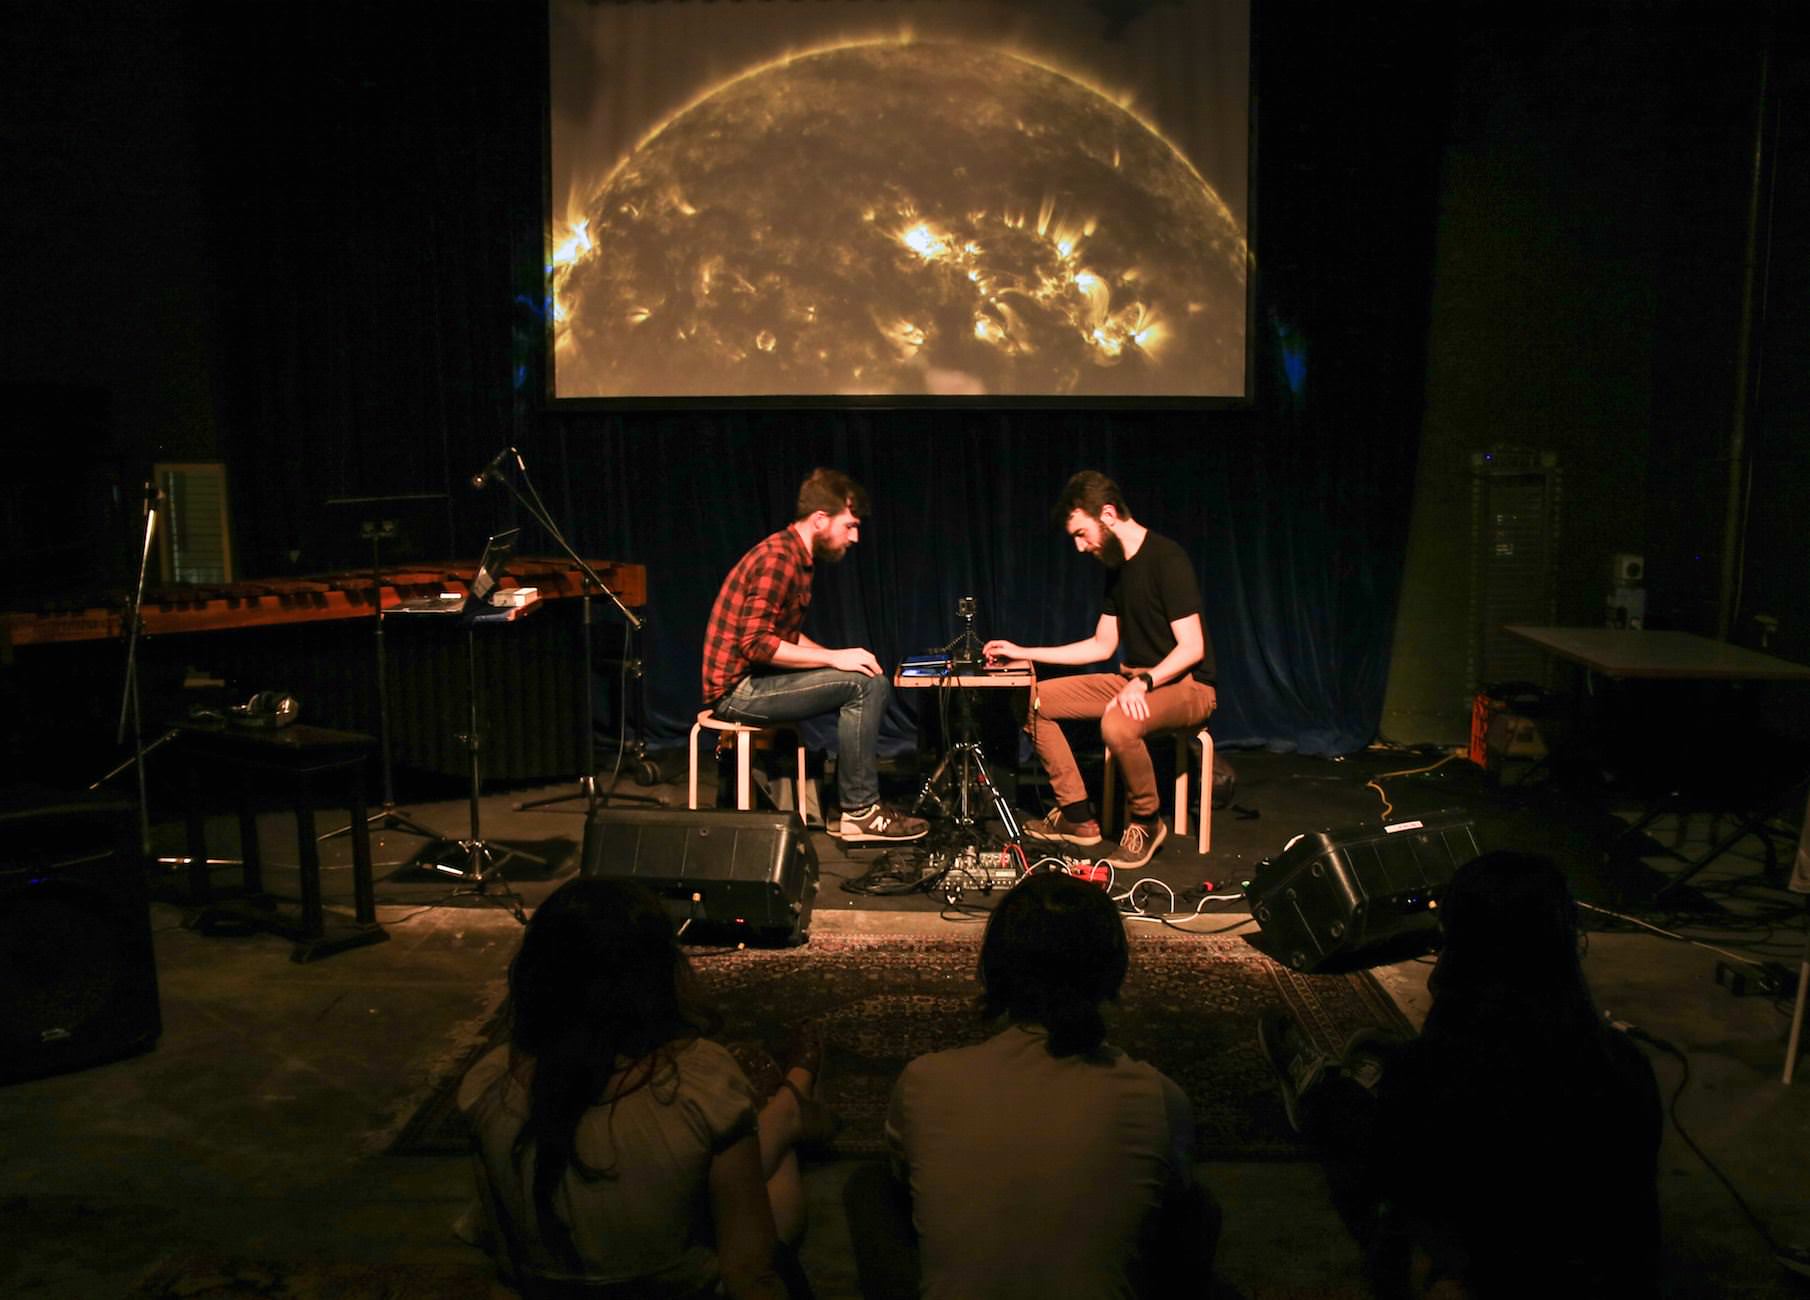 Alec and Charles performing on stage with astronomical images behind them.